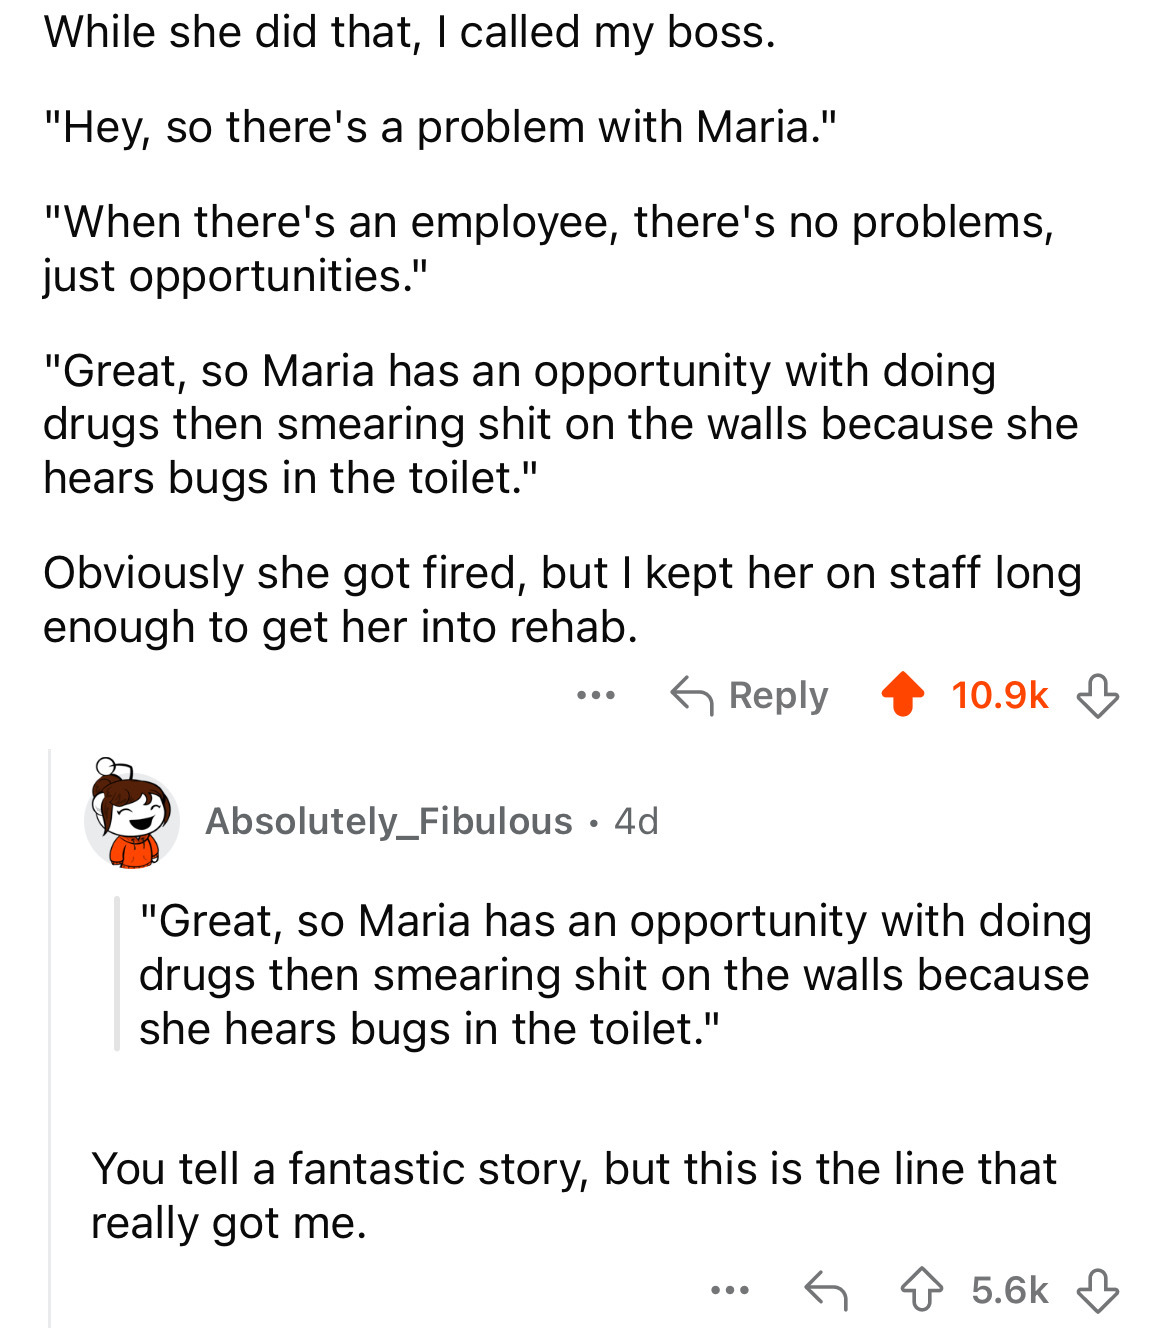 circle - While she did that, I called my boss. "Hey, so there's a problem with Maria." "When there's an employee, there's no problems, just opportunities." "Great, so Maria has an opportunity with doing drugs then smearing shit on the walls because she he